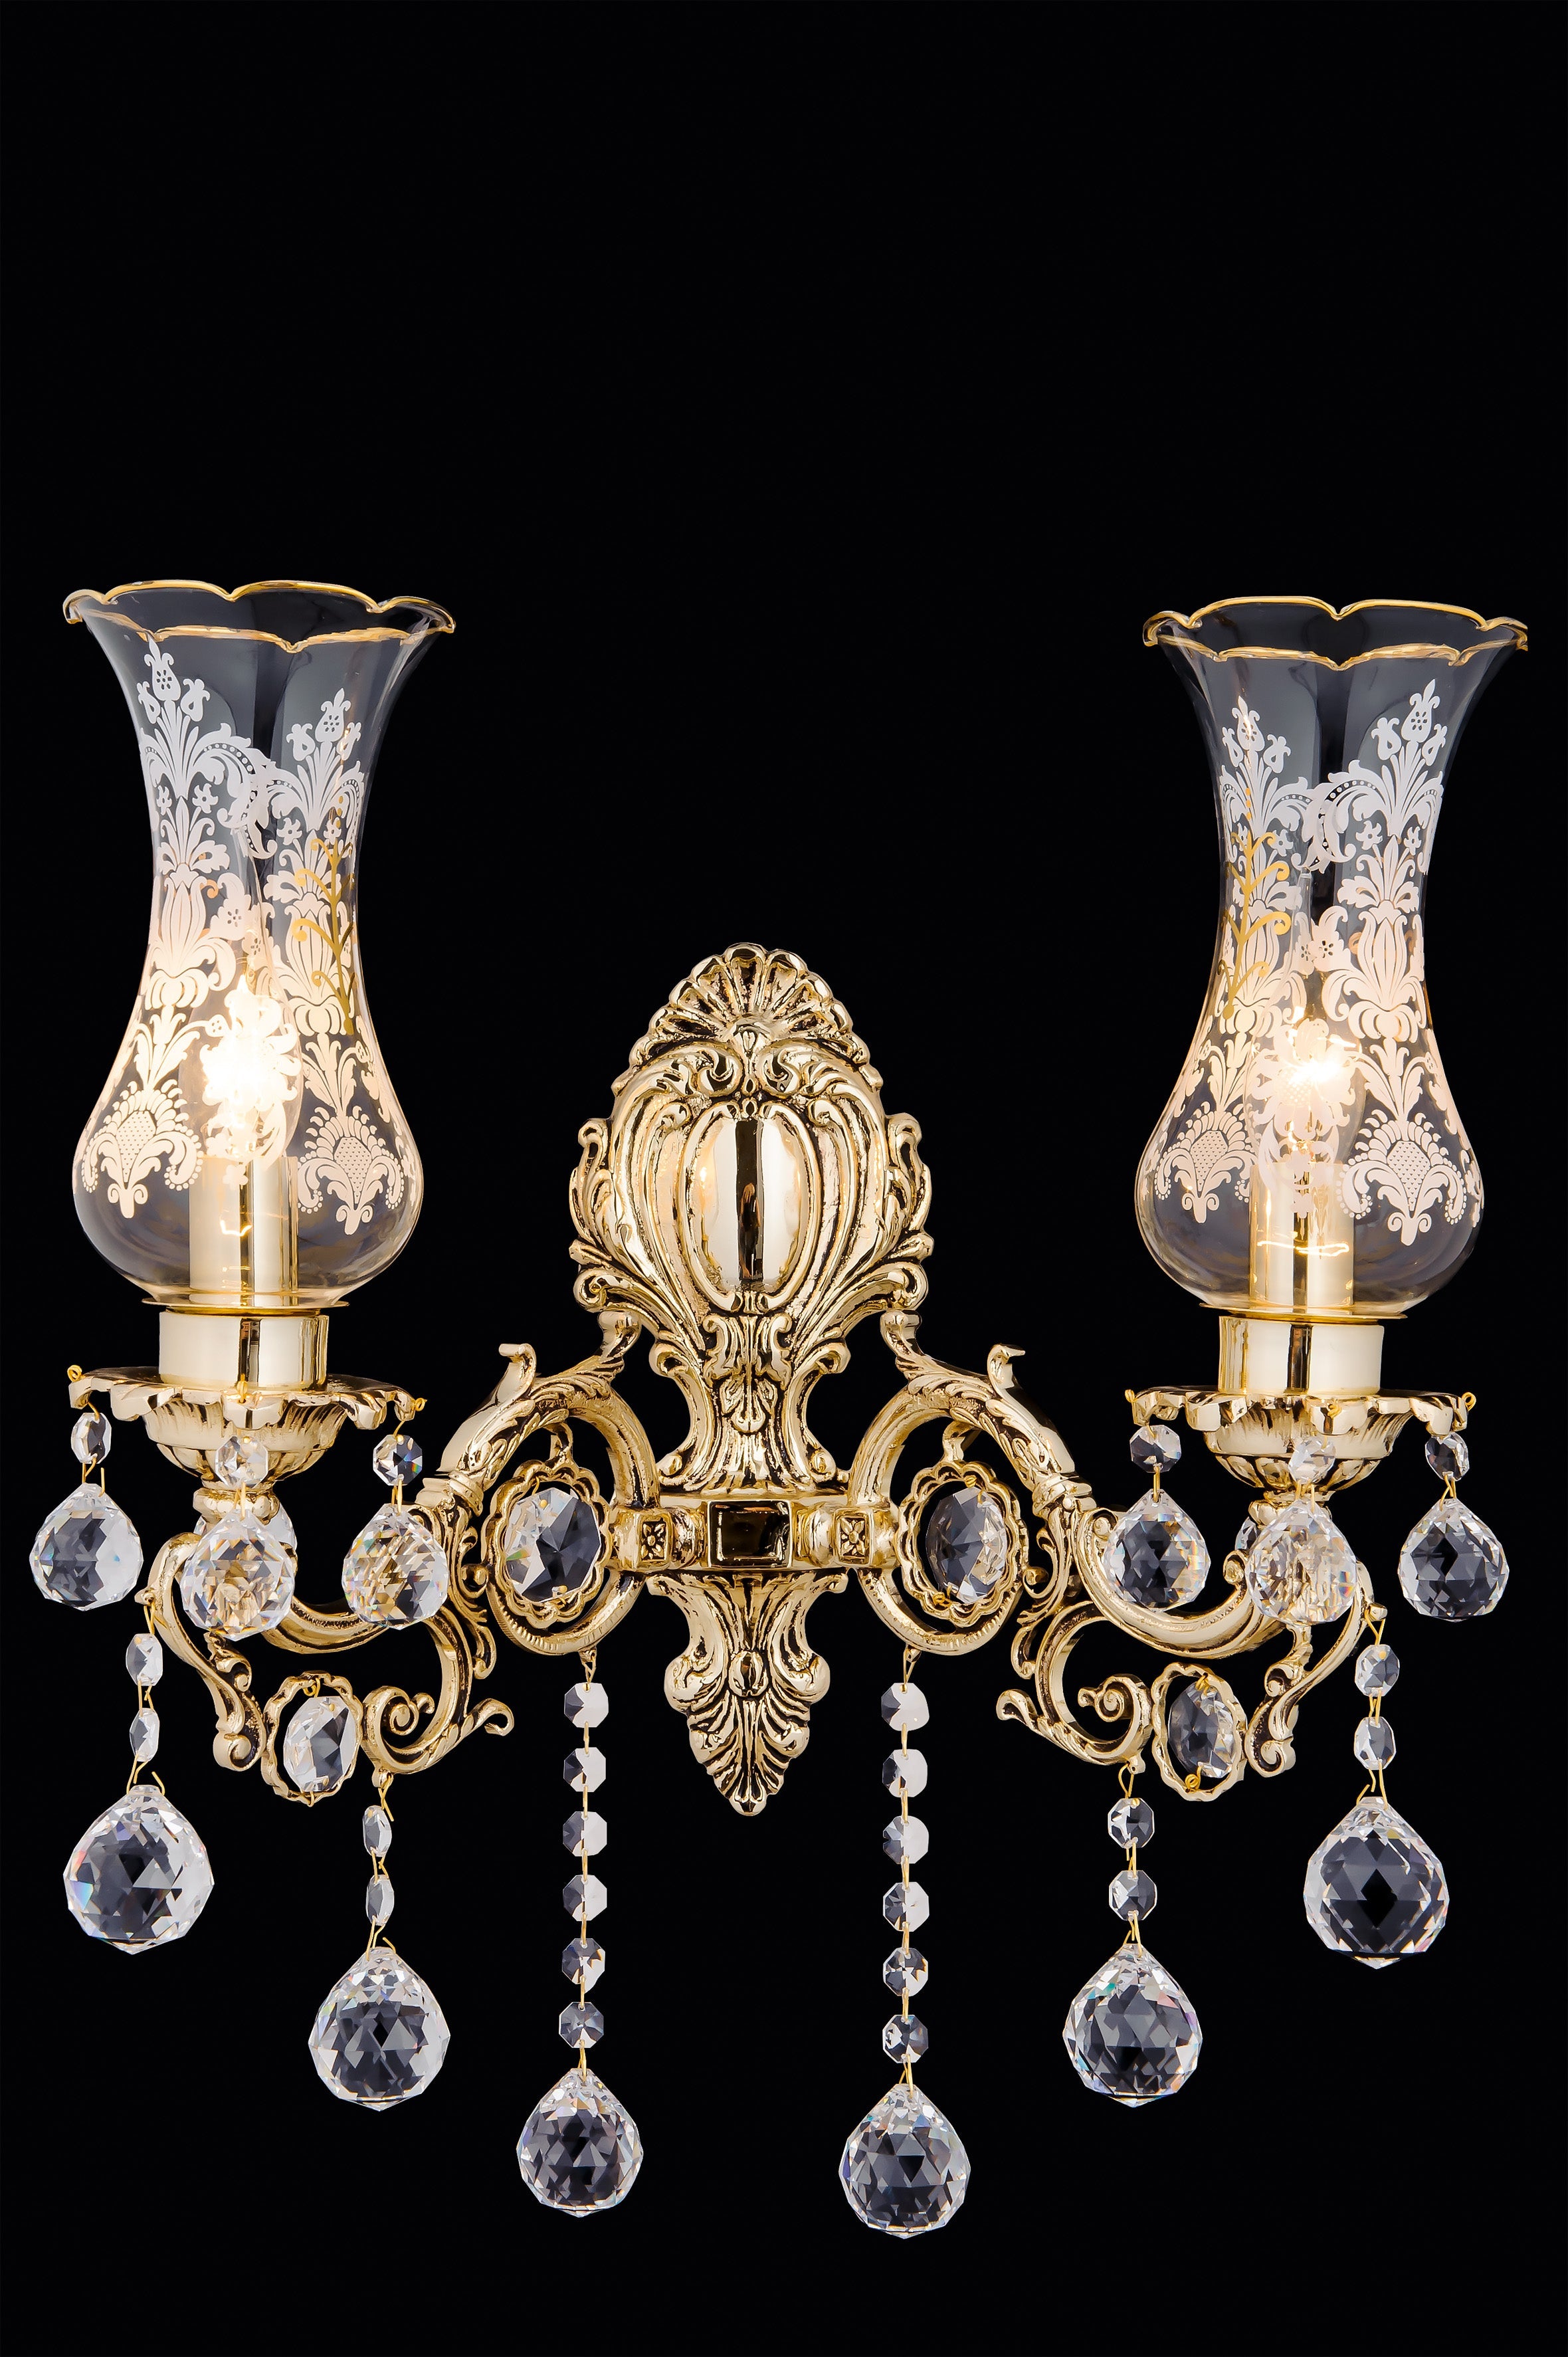 Ravenna Regal 2-Light Asfour Crystal Wall Sconce in Gold Finish